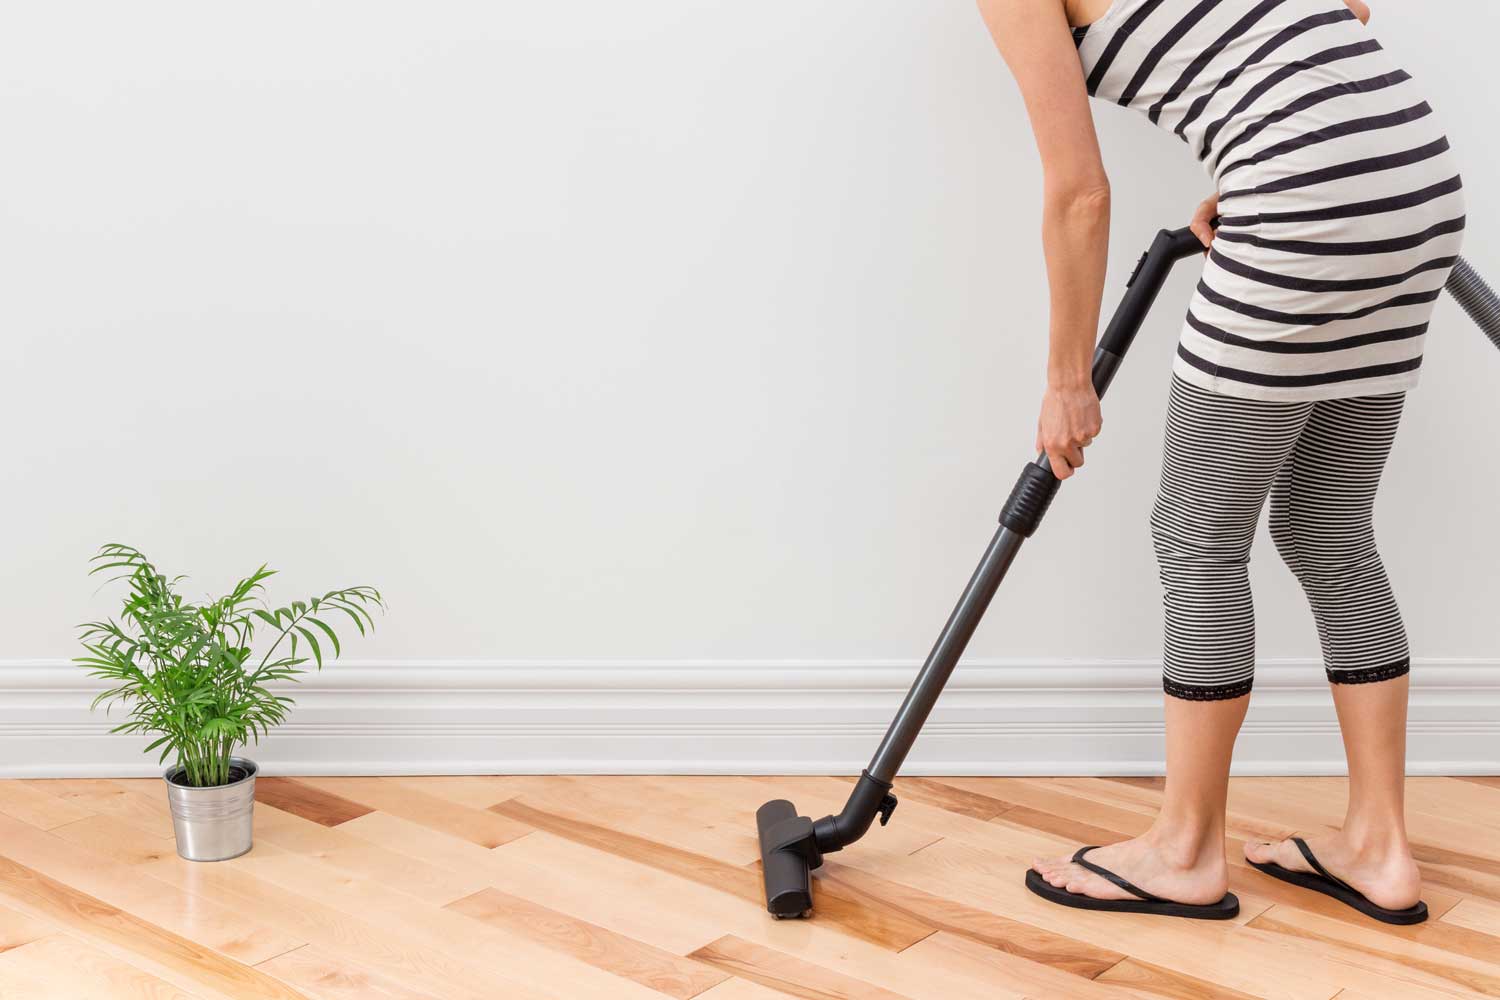 Regulary vacuum or sweep floors to remove dirt and keep your home floors looking amazing - tips from Footprints Floors in Minneapolis.